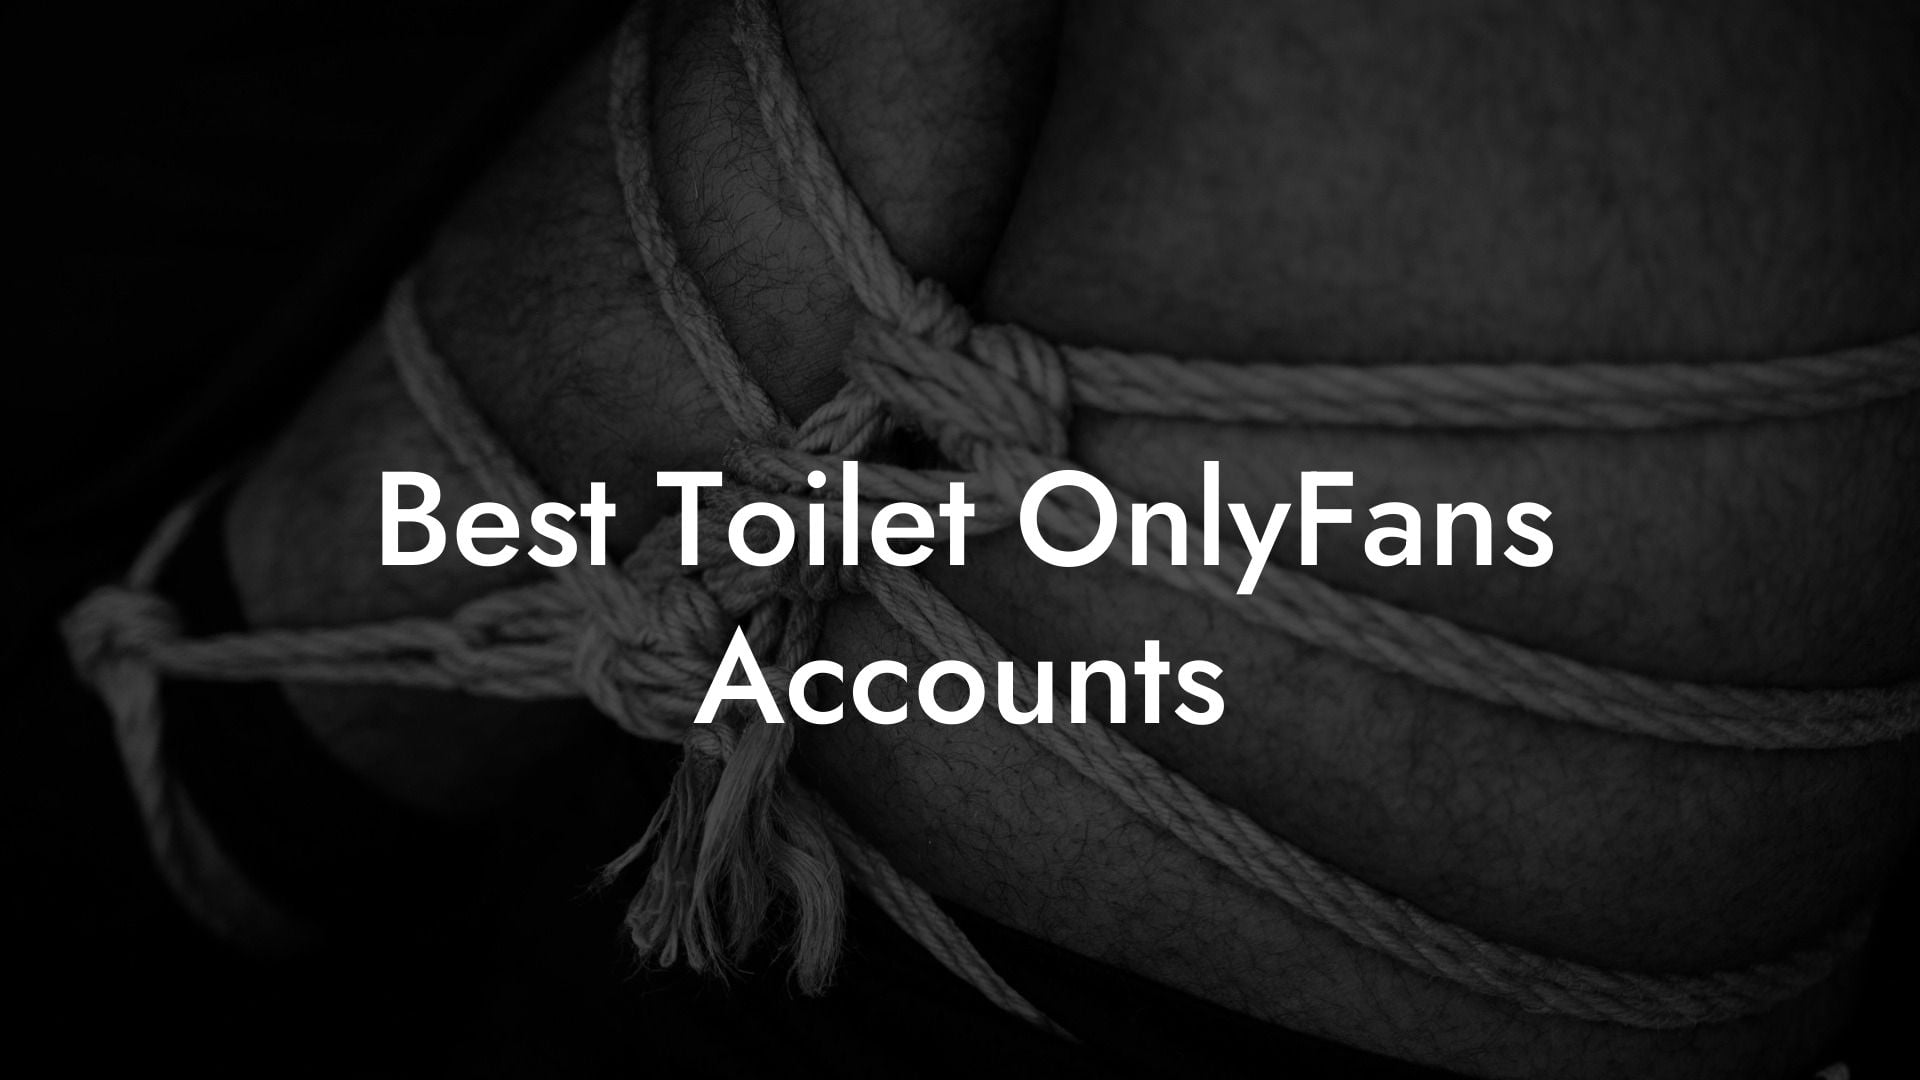 Best Toilet OnlyFans Accounts